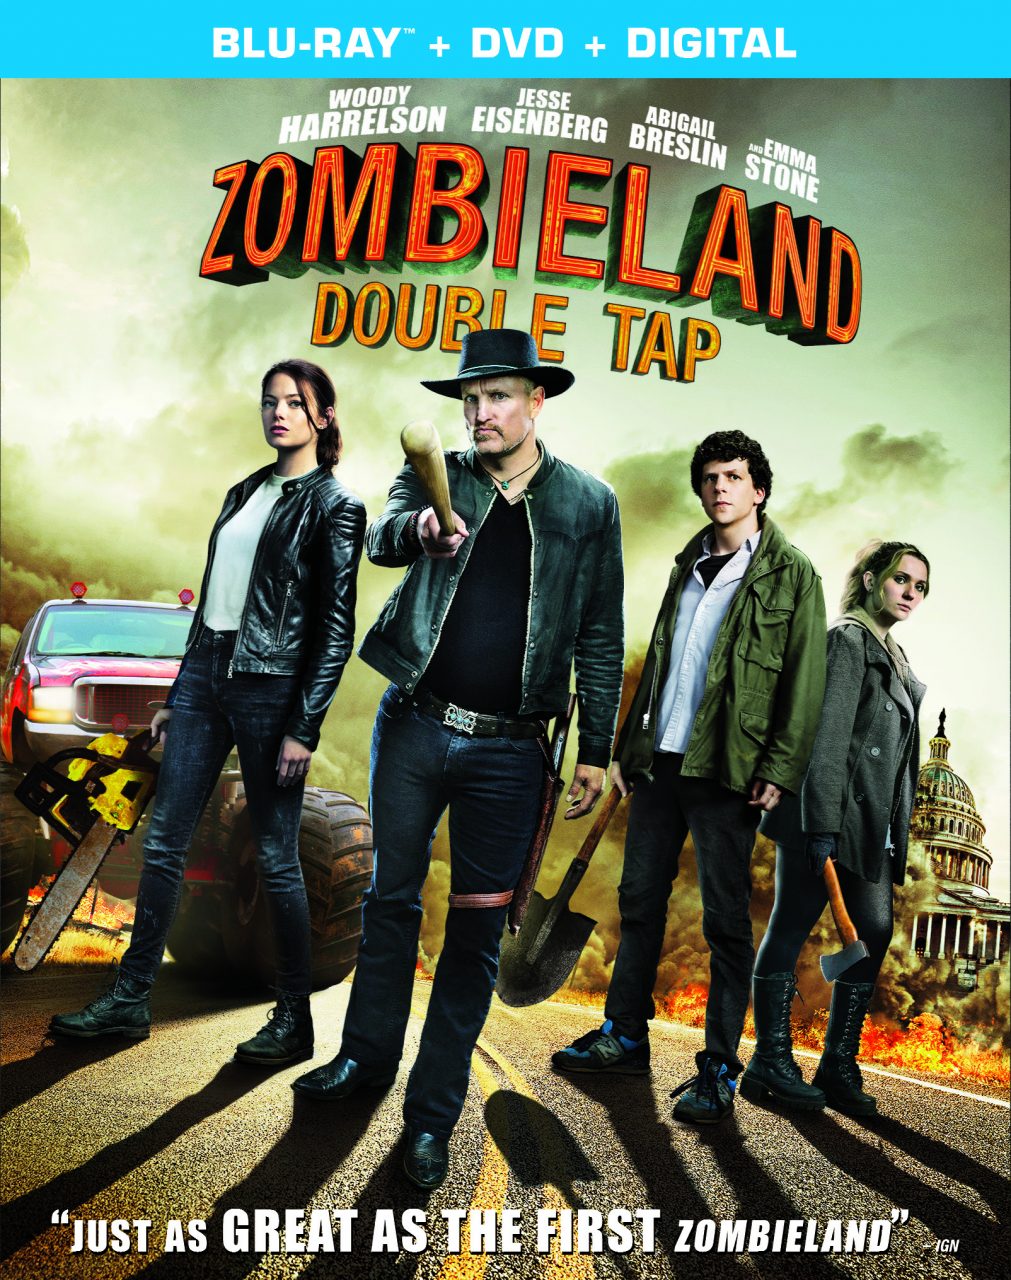 Zombieland: Double Tap Blu-Ray Combo Pack cover (Sony Pictures Home Entertainment)